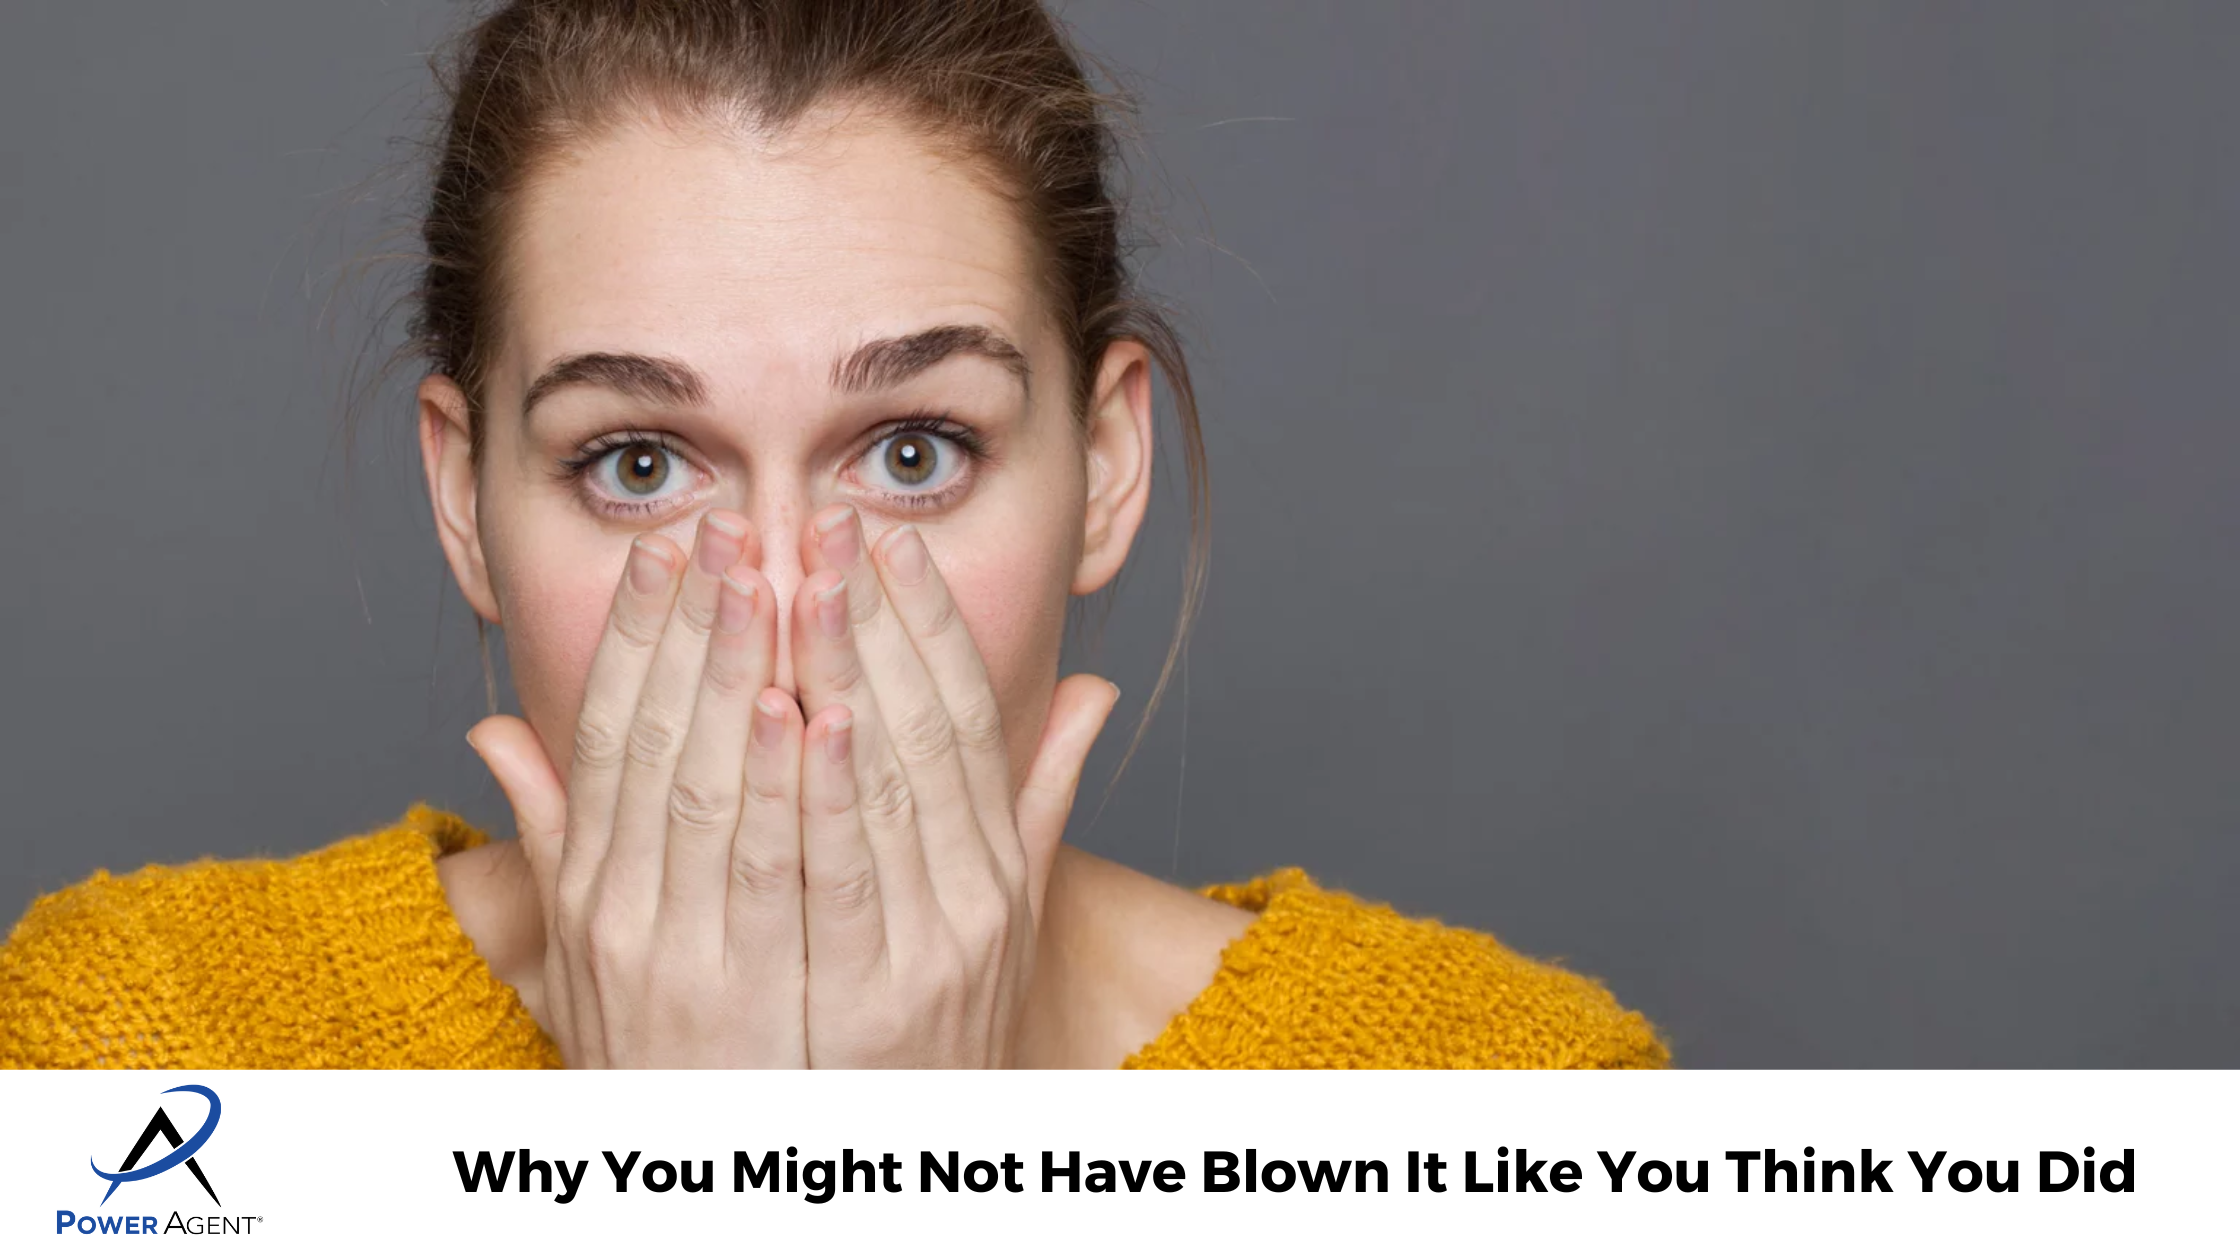 Why You Might Not Have Blown It Like You Think You Did